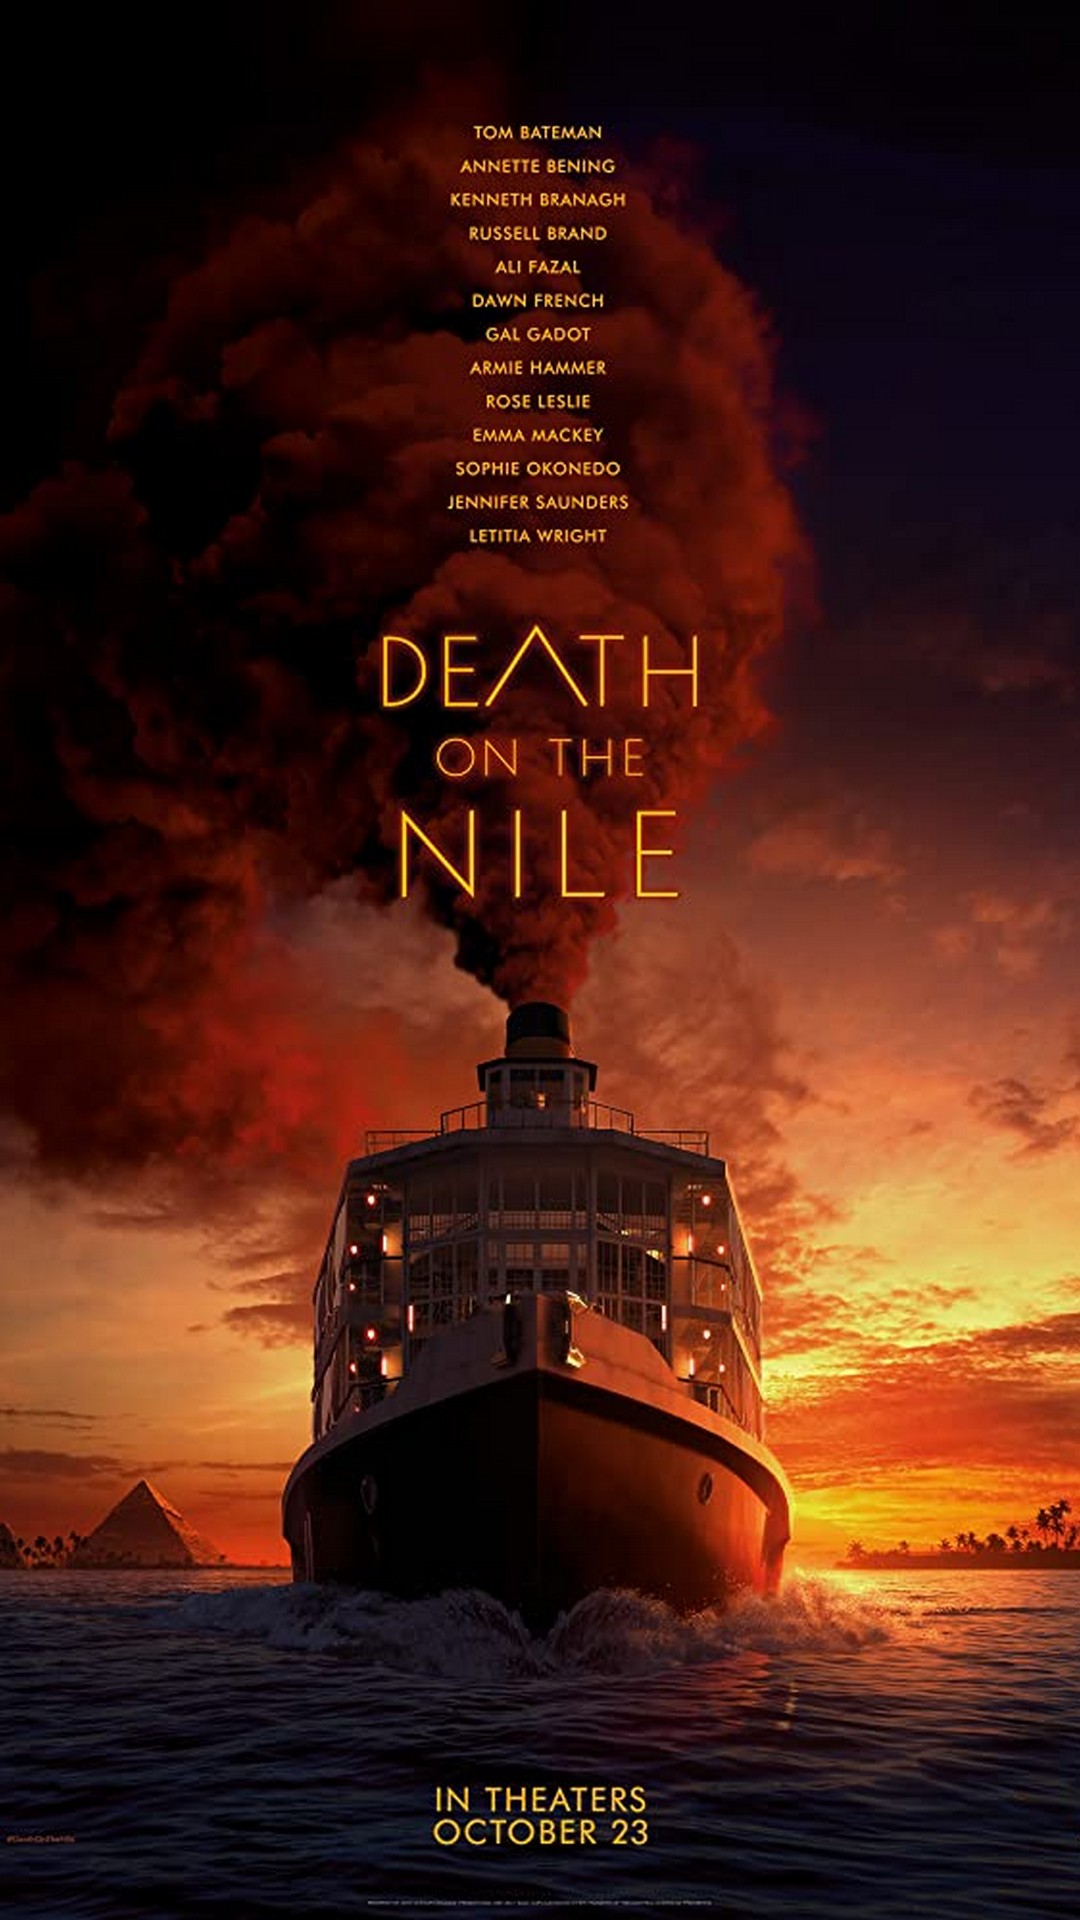 Death on the Nile Poster HD With high-resolution 1080X1920 pixel. You can use this poster wallpaper for your Desktop Computers, Mac Screensavers, Windows Backgrounds, iPhone Wallpapers, Tablet or Android Lock screen and another Mobile device